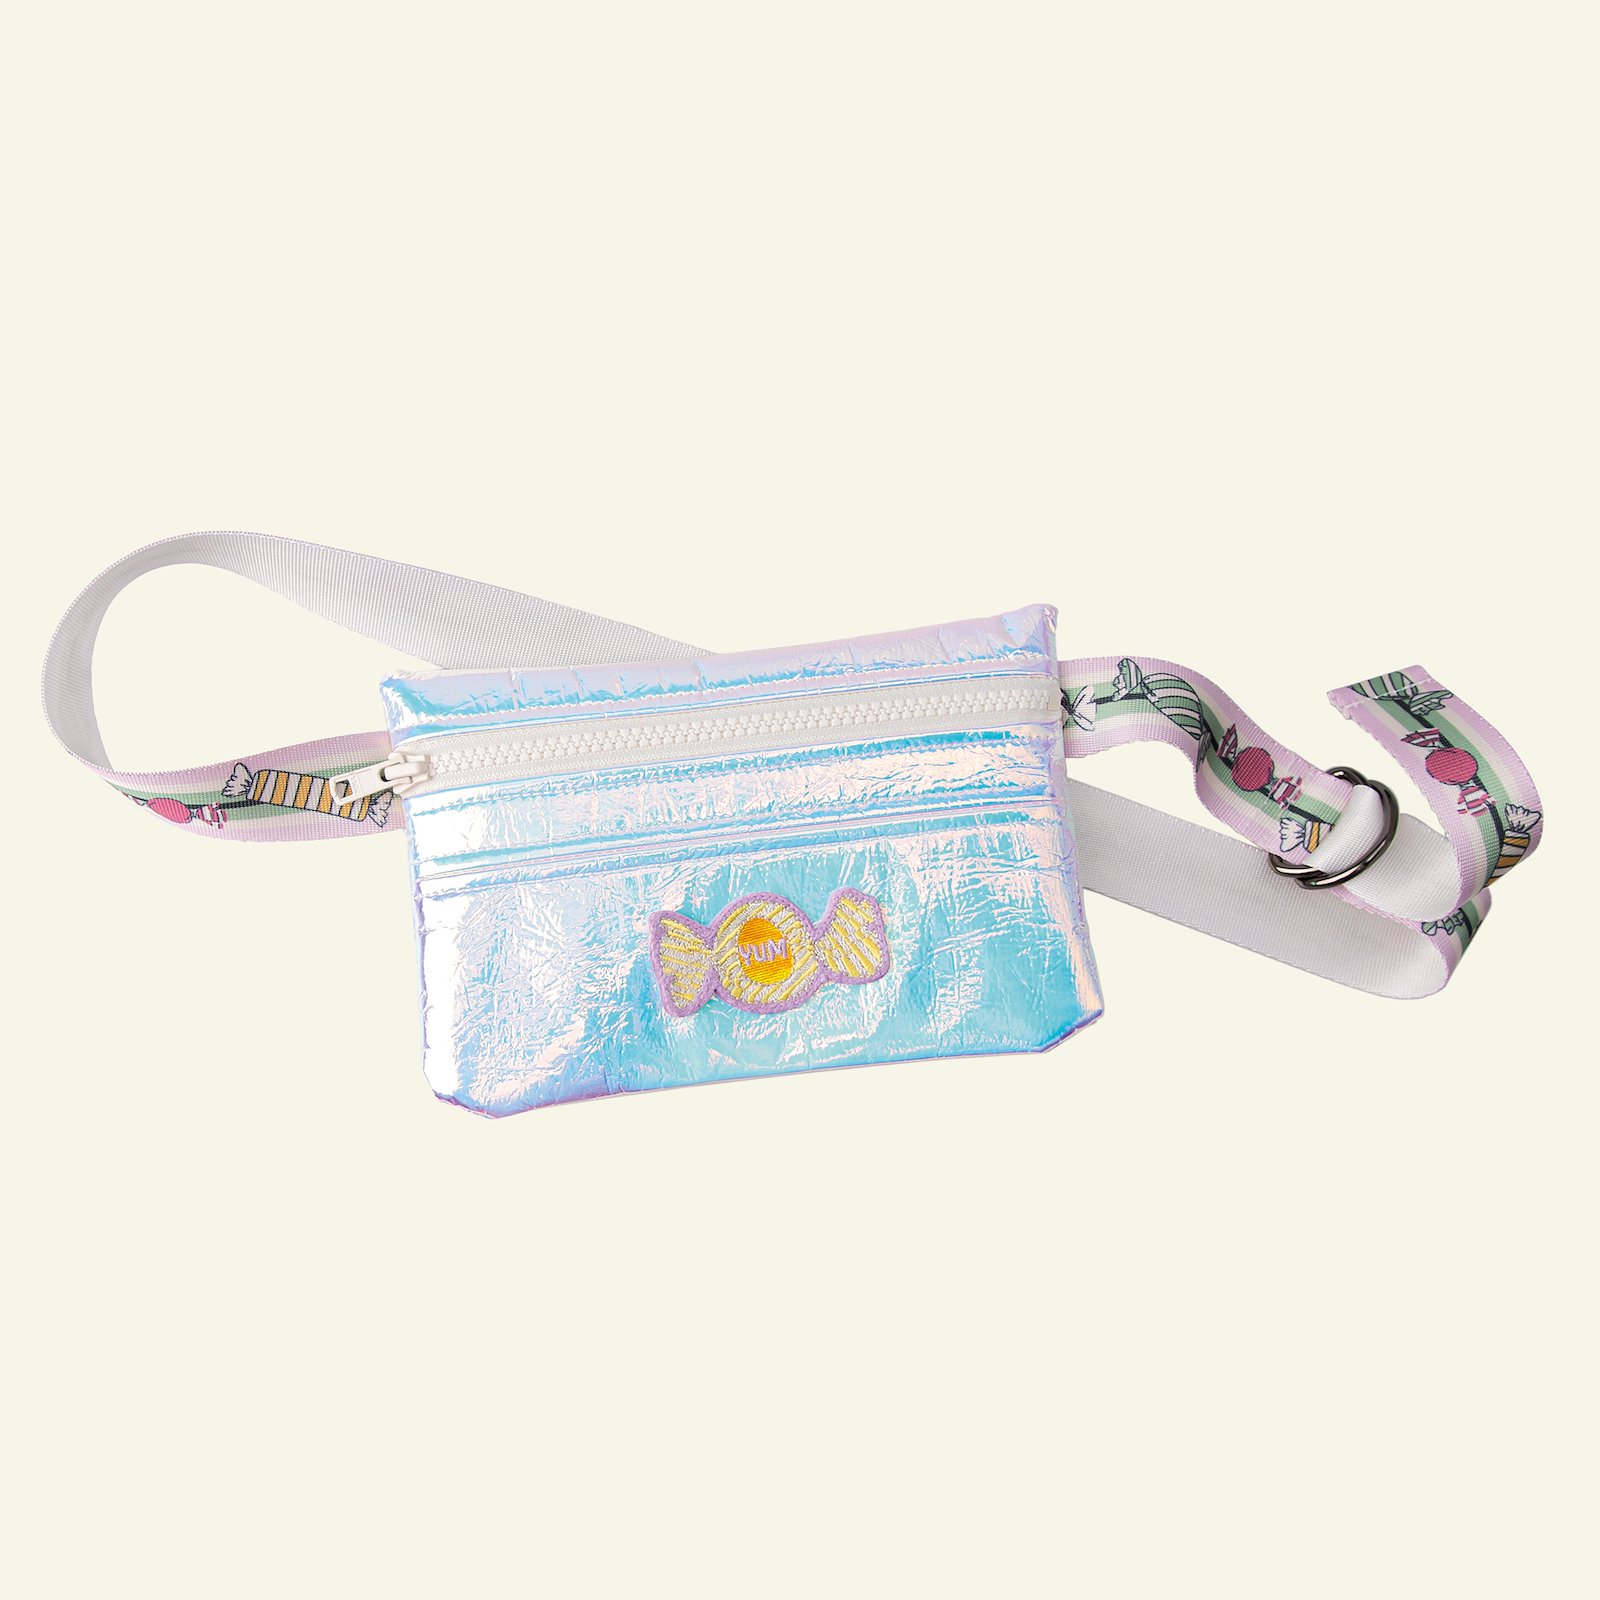 Leather look holographic pastel blue p90328_824045_82409_26523_sskit